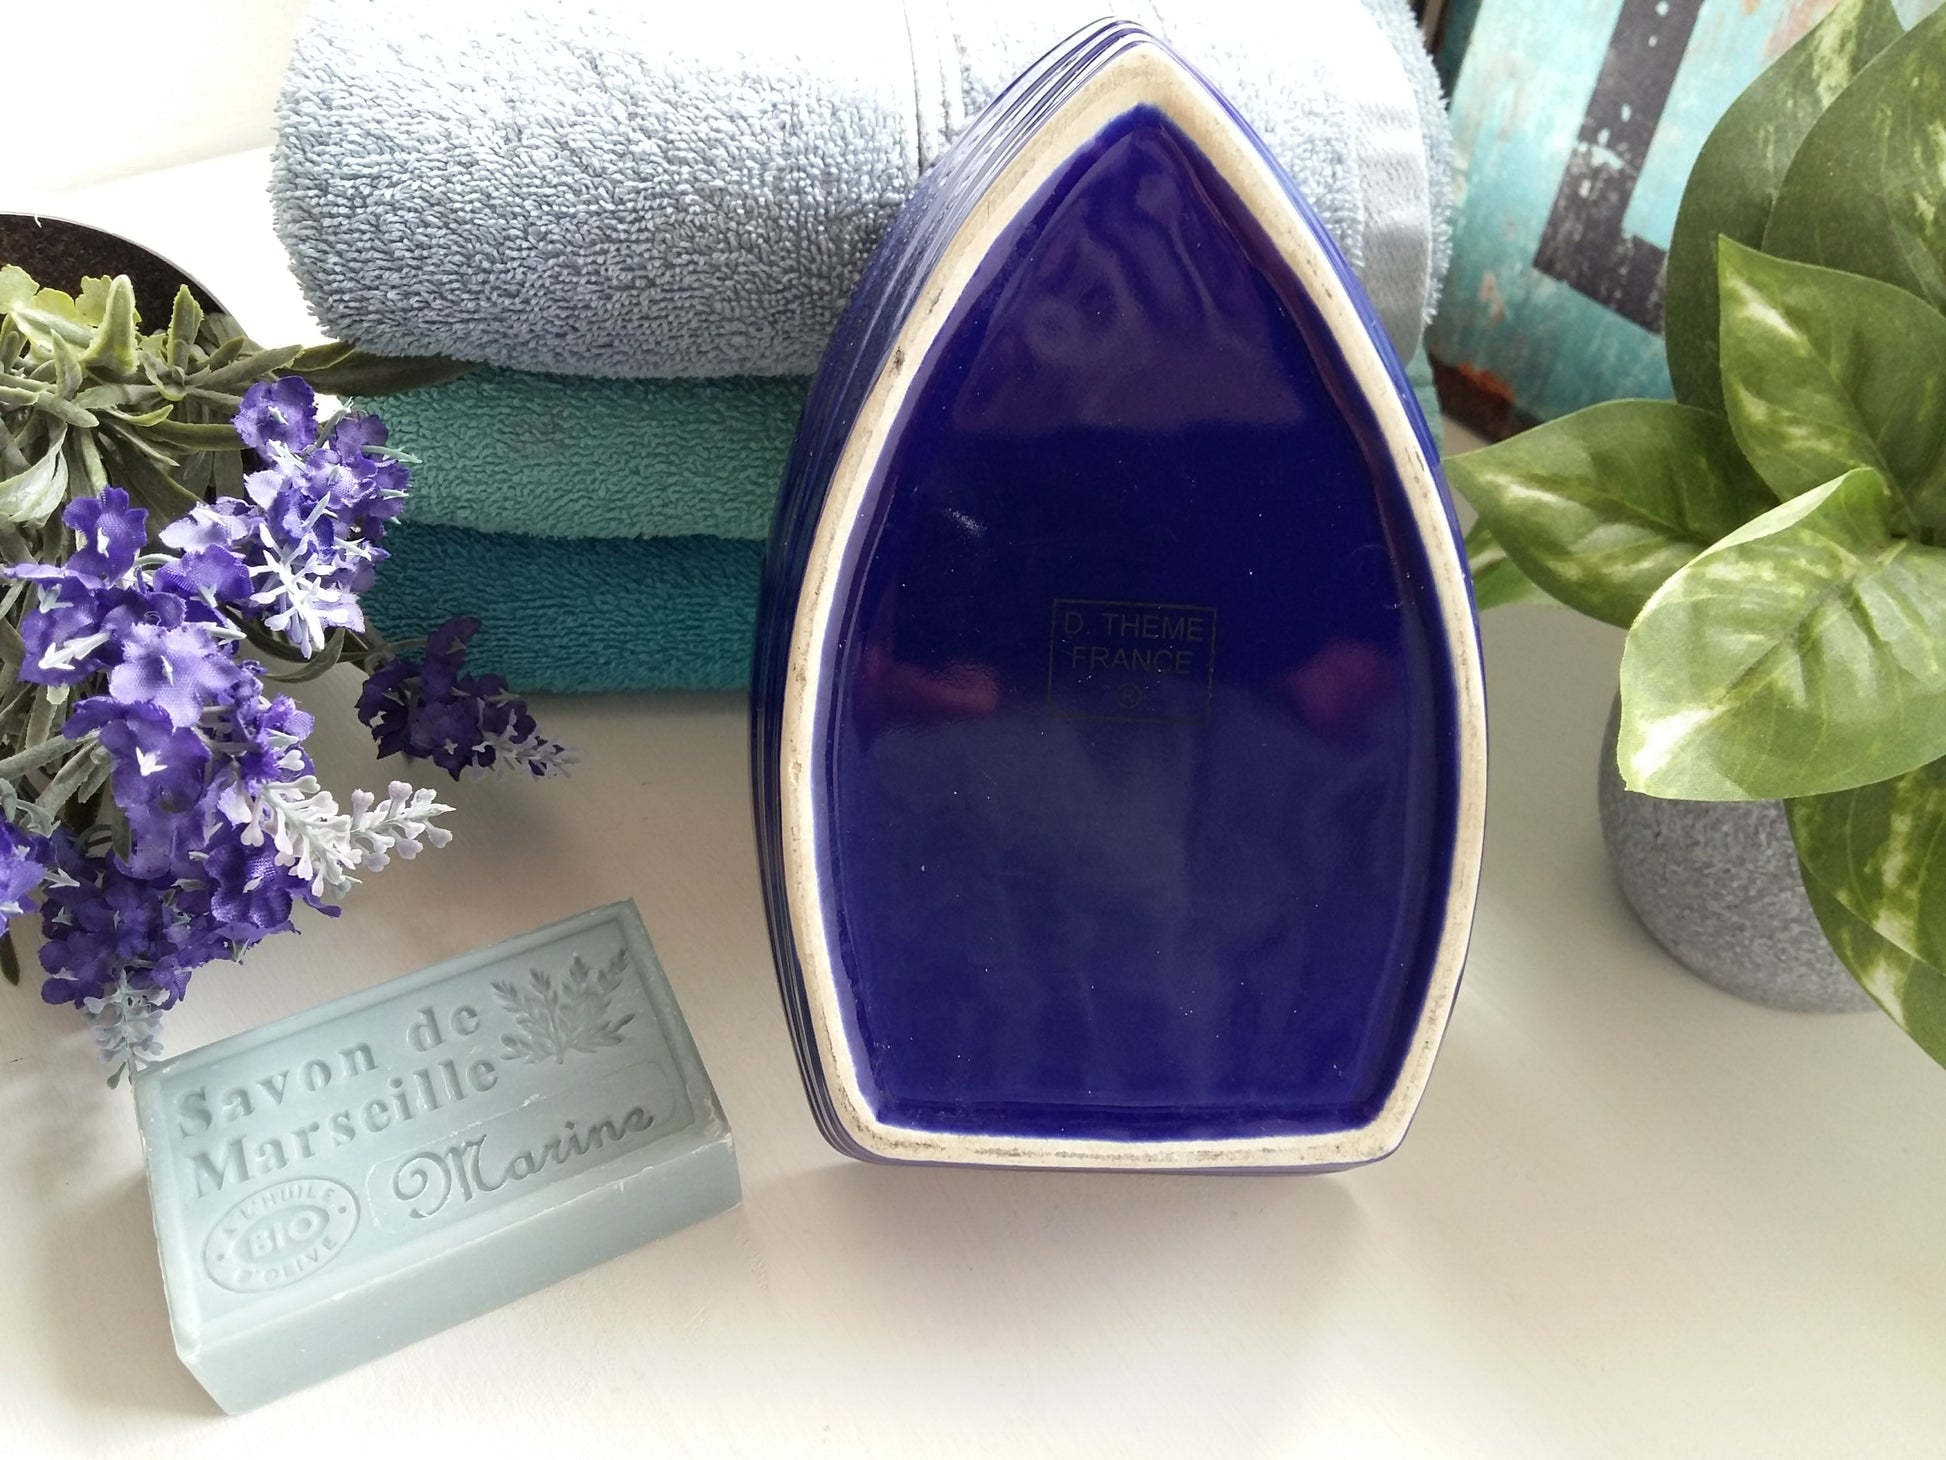 Boat Shape Soap Dish. Blue and White Boat. Nautical Bathroom Accessory from Tiggy & Pip - €59.00! Shop now at Tiggy and Pip